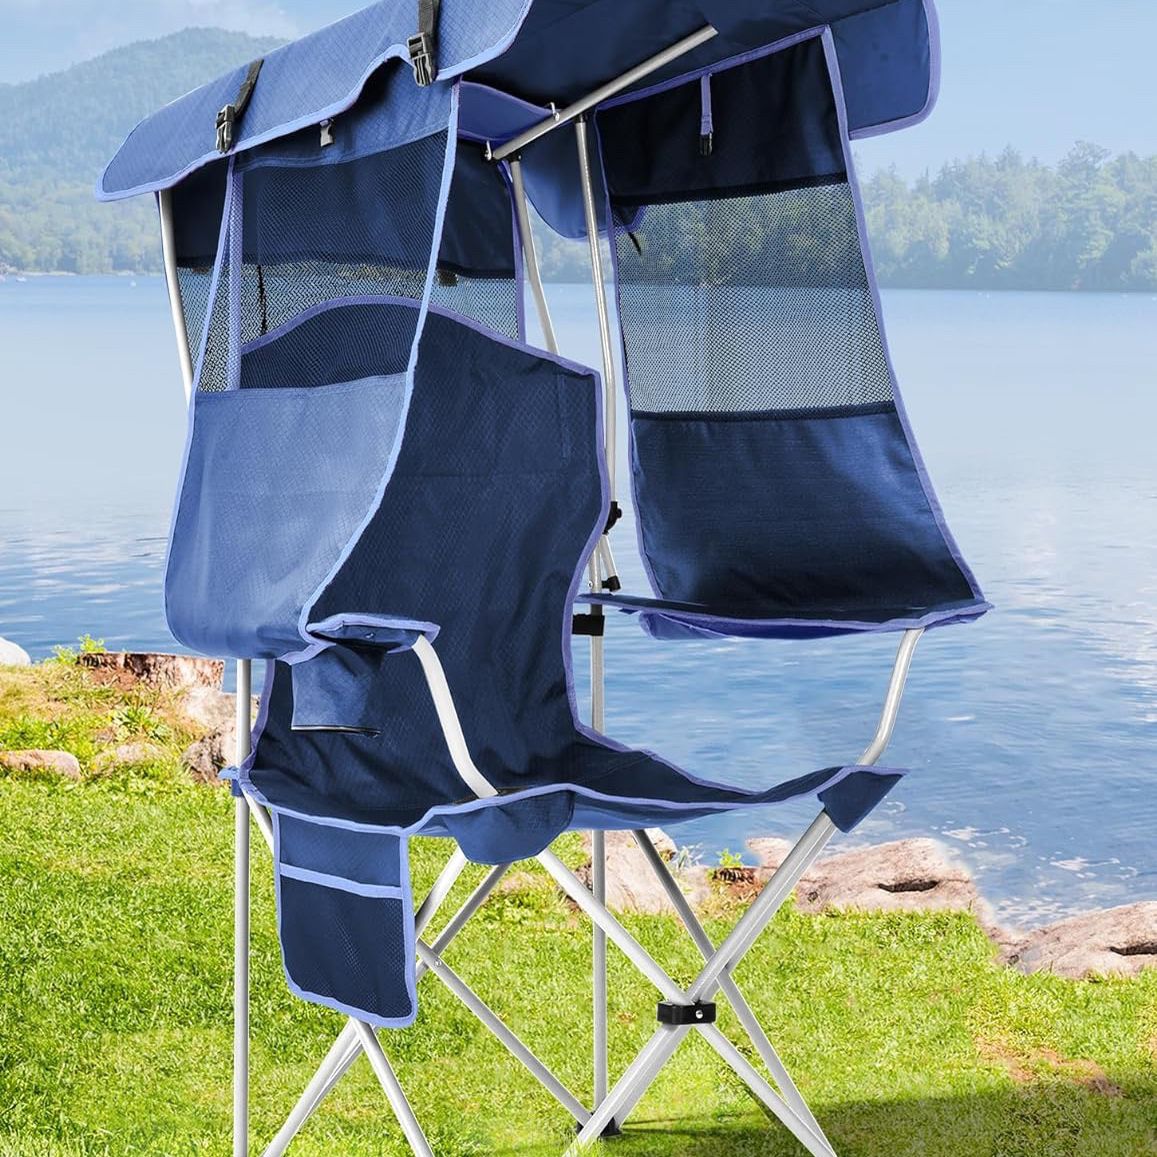 Docusvect Beach Chair with Canopy Shade, Canopy Beach Chair for Adults with Cup Holder, Side Pocket for Camp, Beach, Tailgates, Fishing - Support 330 